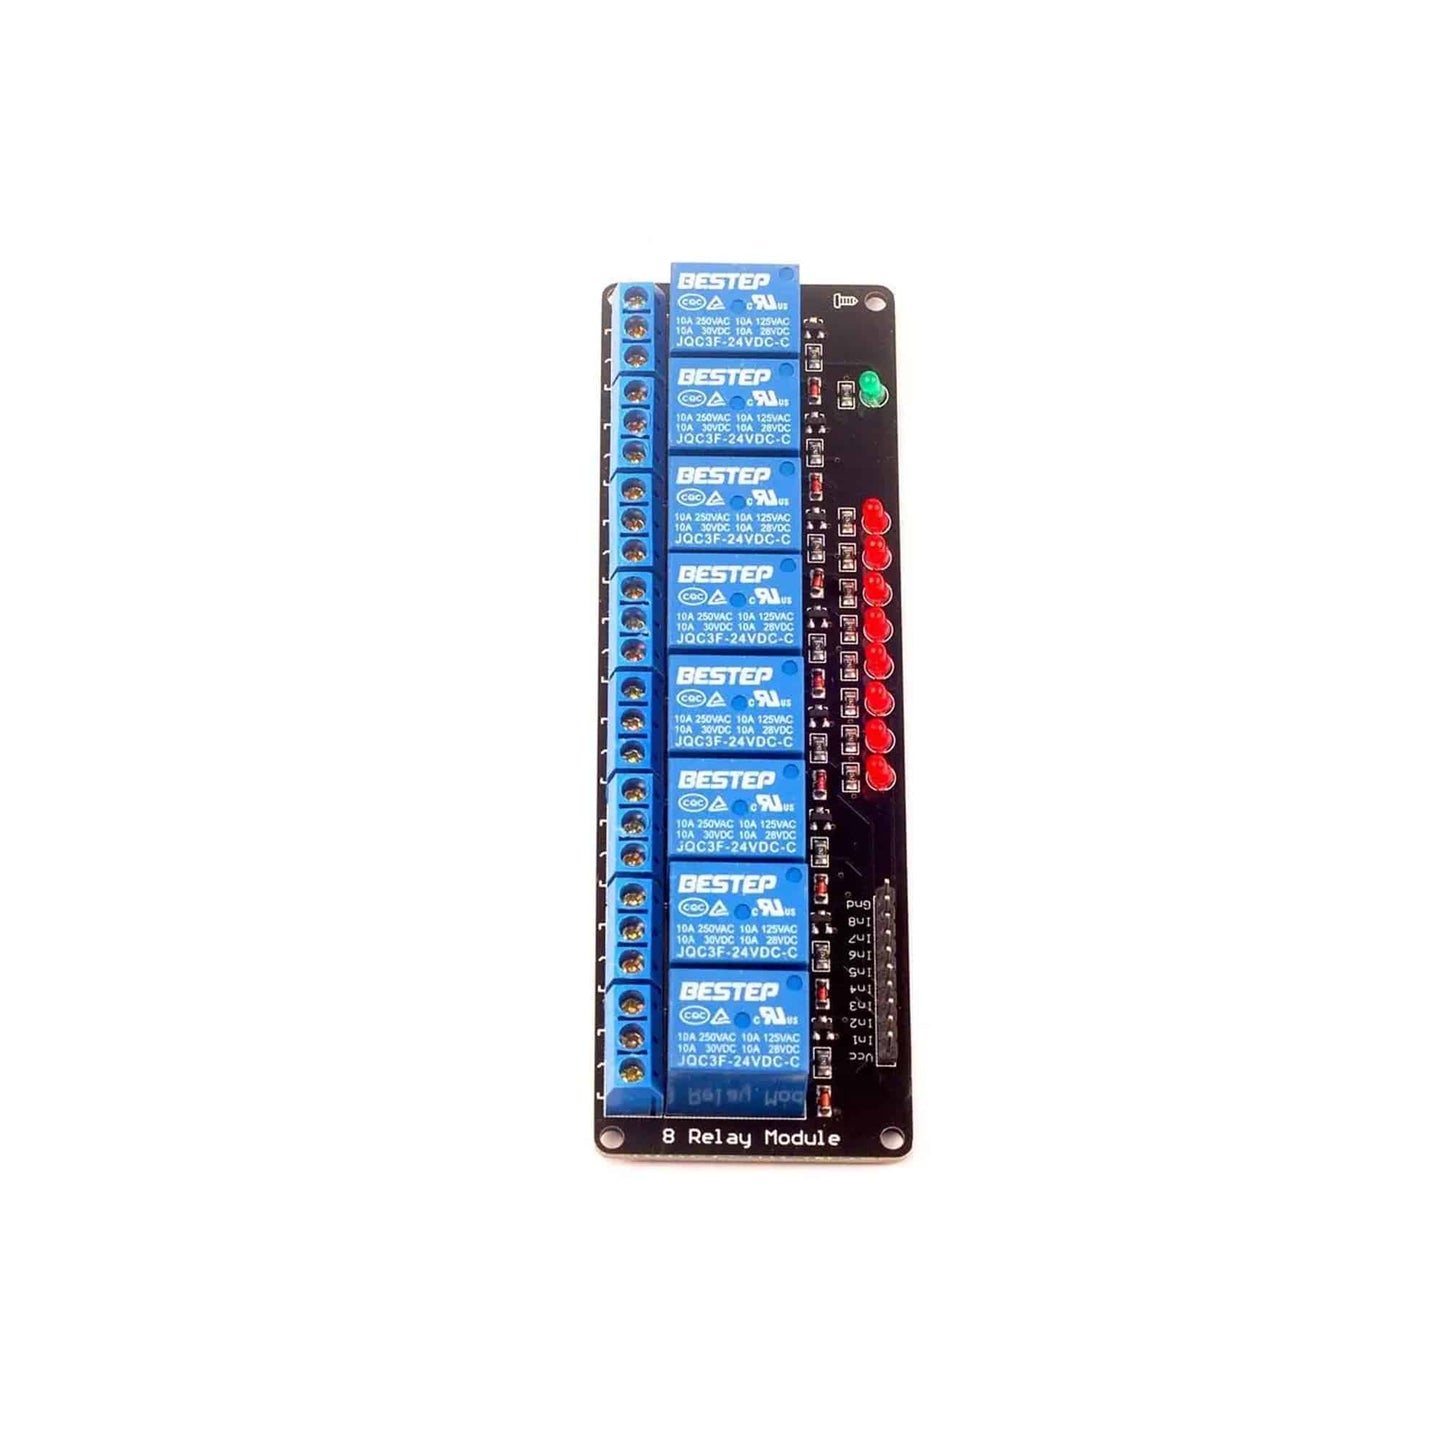 8 Channel 24V Relay Module Shield for Arduino Meage